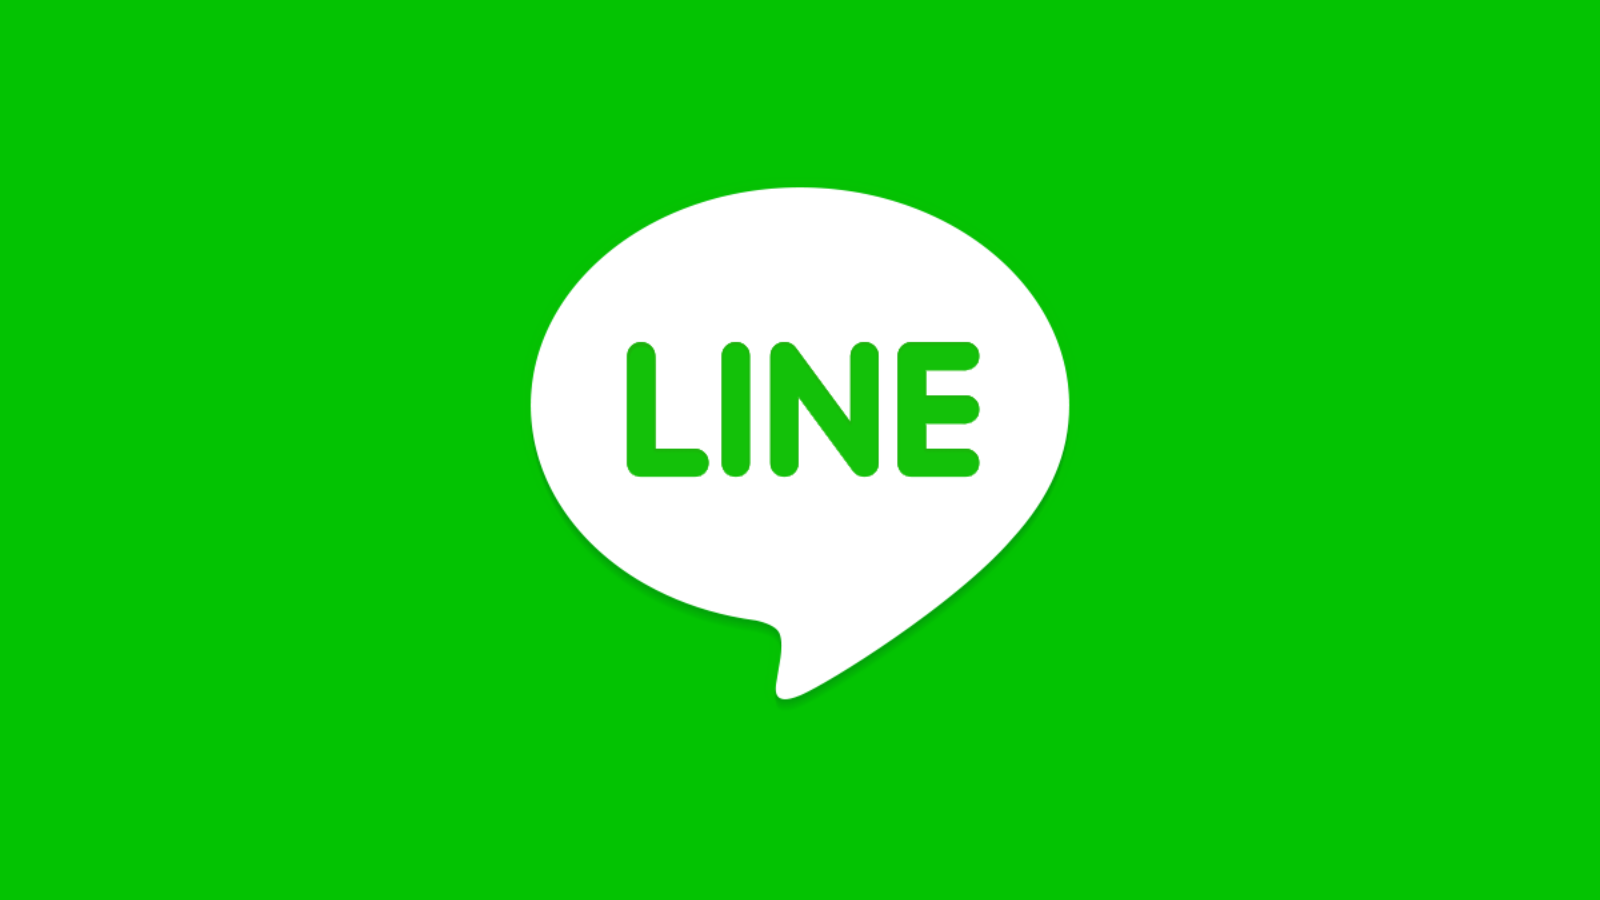 Allow customers to contact you using Line Chat